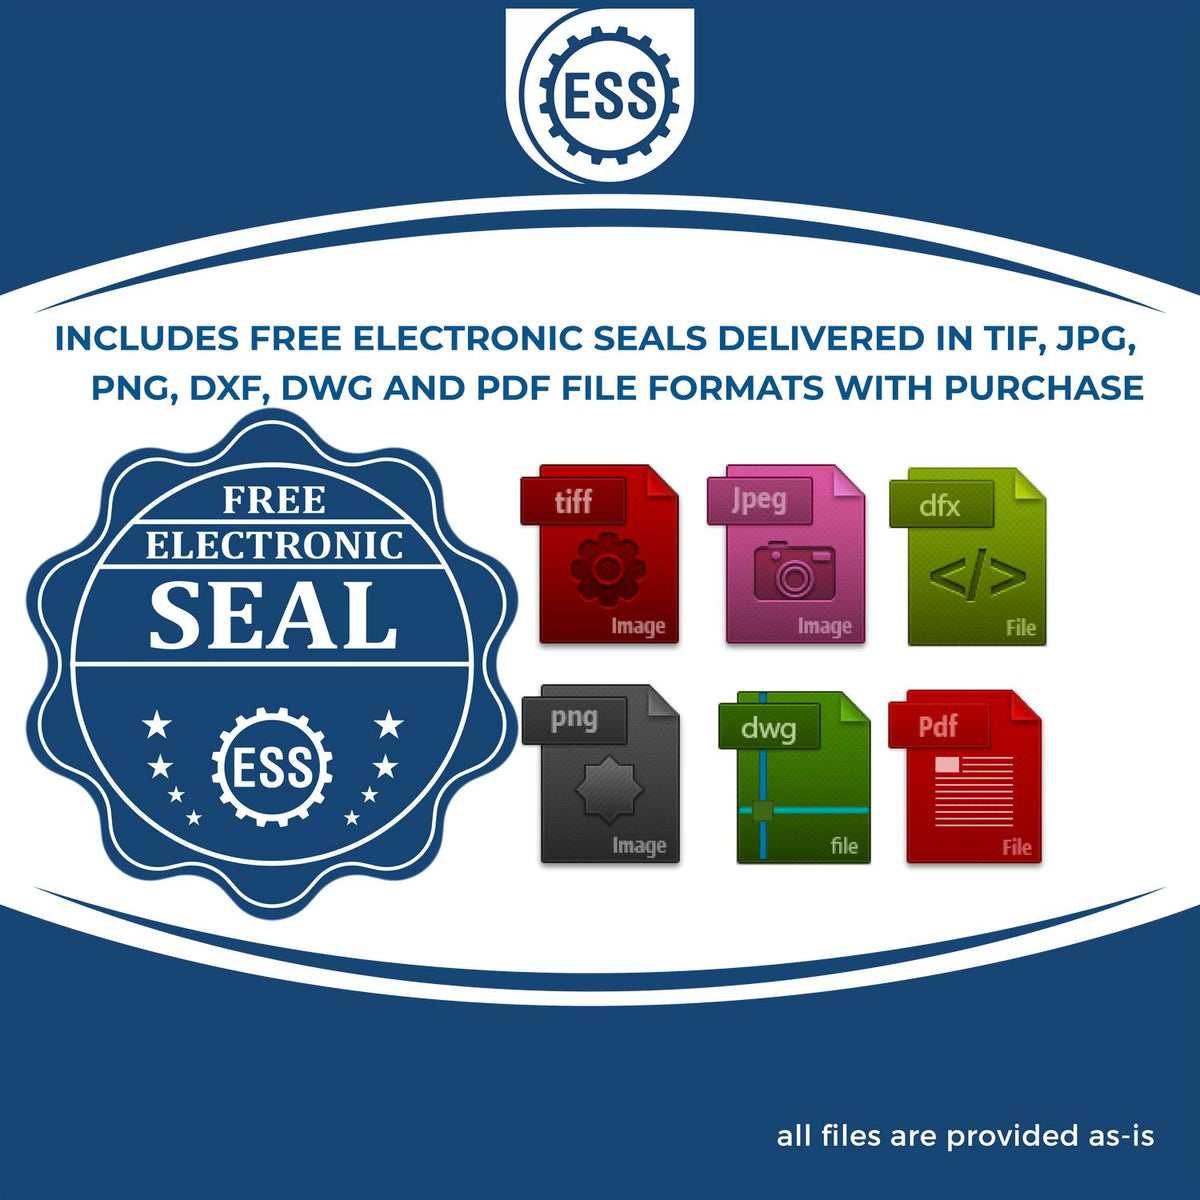 An infographic for the free electronic seal for the Slim Pre-Inked Idaho Land Surveyor Seal Stamp illustrating the different file type icons such as DXF, DWG, TIF, JPG and PNG.